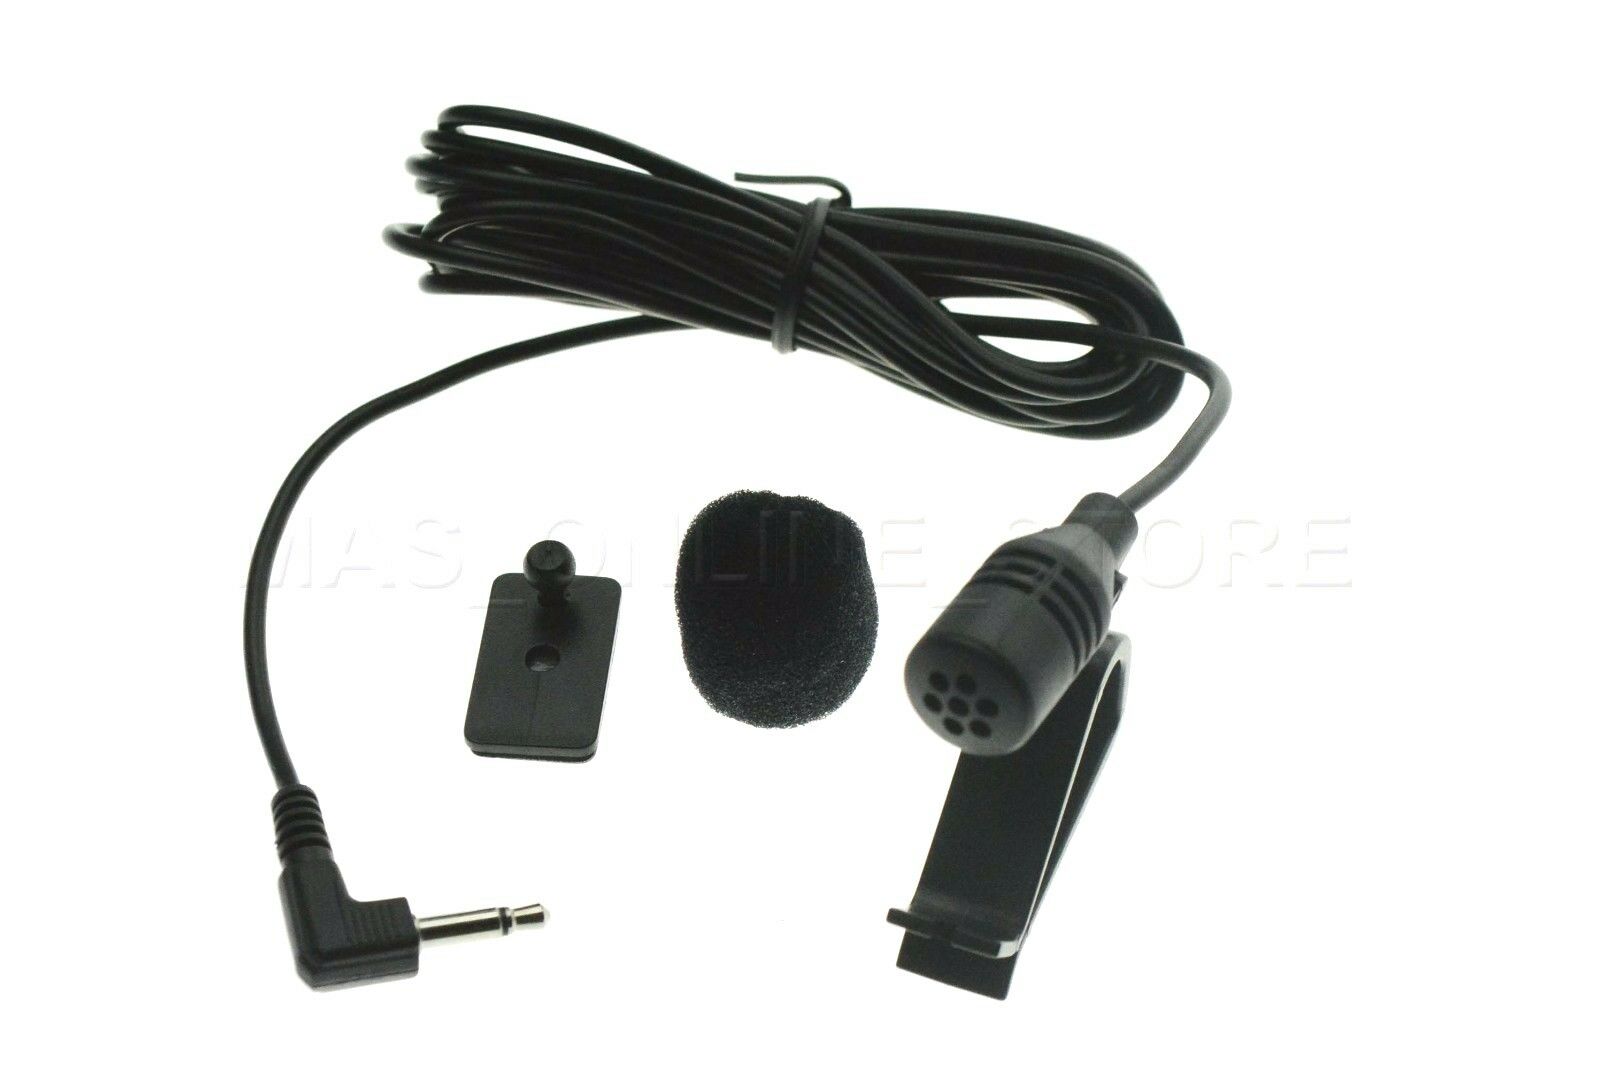 Bluetooth Microphone For Kenwood Ddx370 Ddx-371 *pay Today Ships Today*